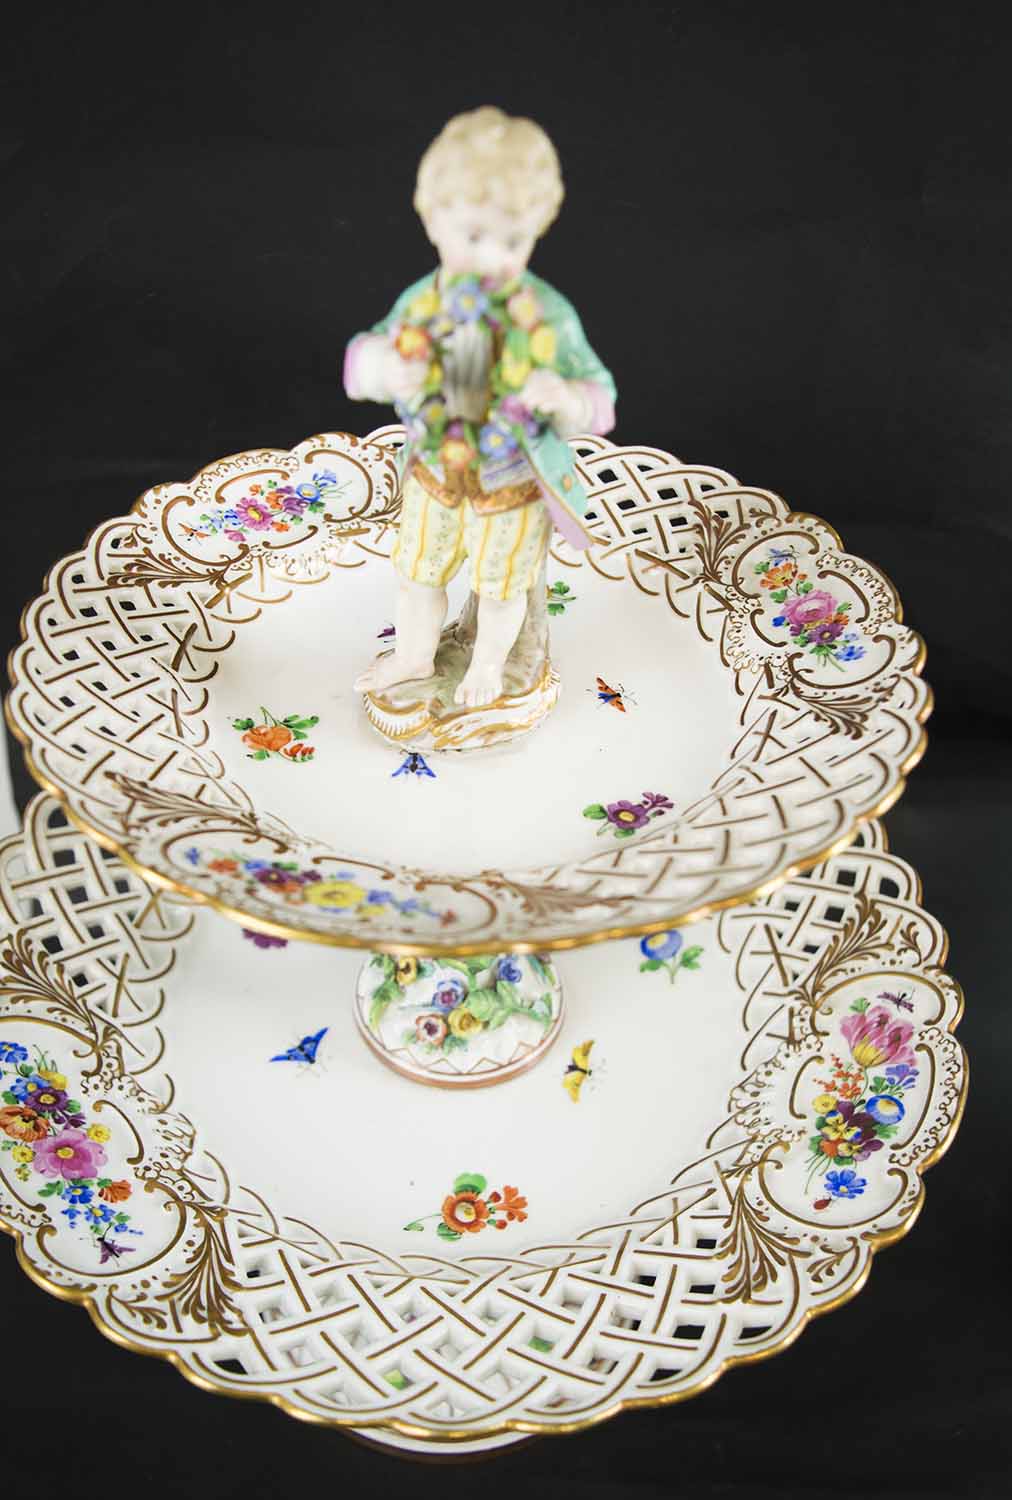 ANTIQUE MEISSEN PORCELAIN A PAIR OF RETICULLARD TWO TIER CAKE STANDS, circa 1870, - Image 7 of 7